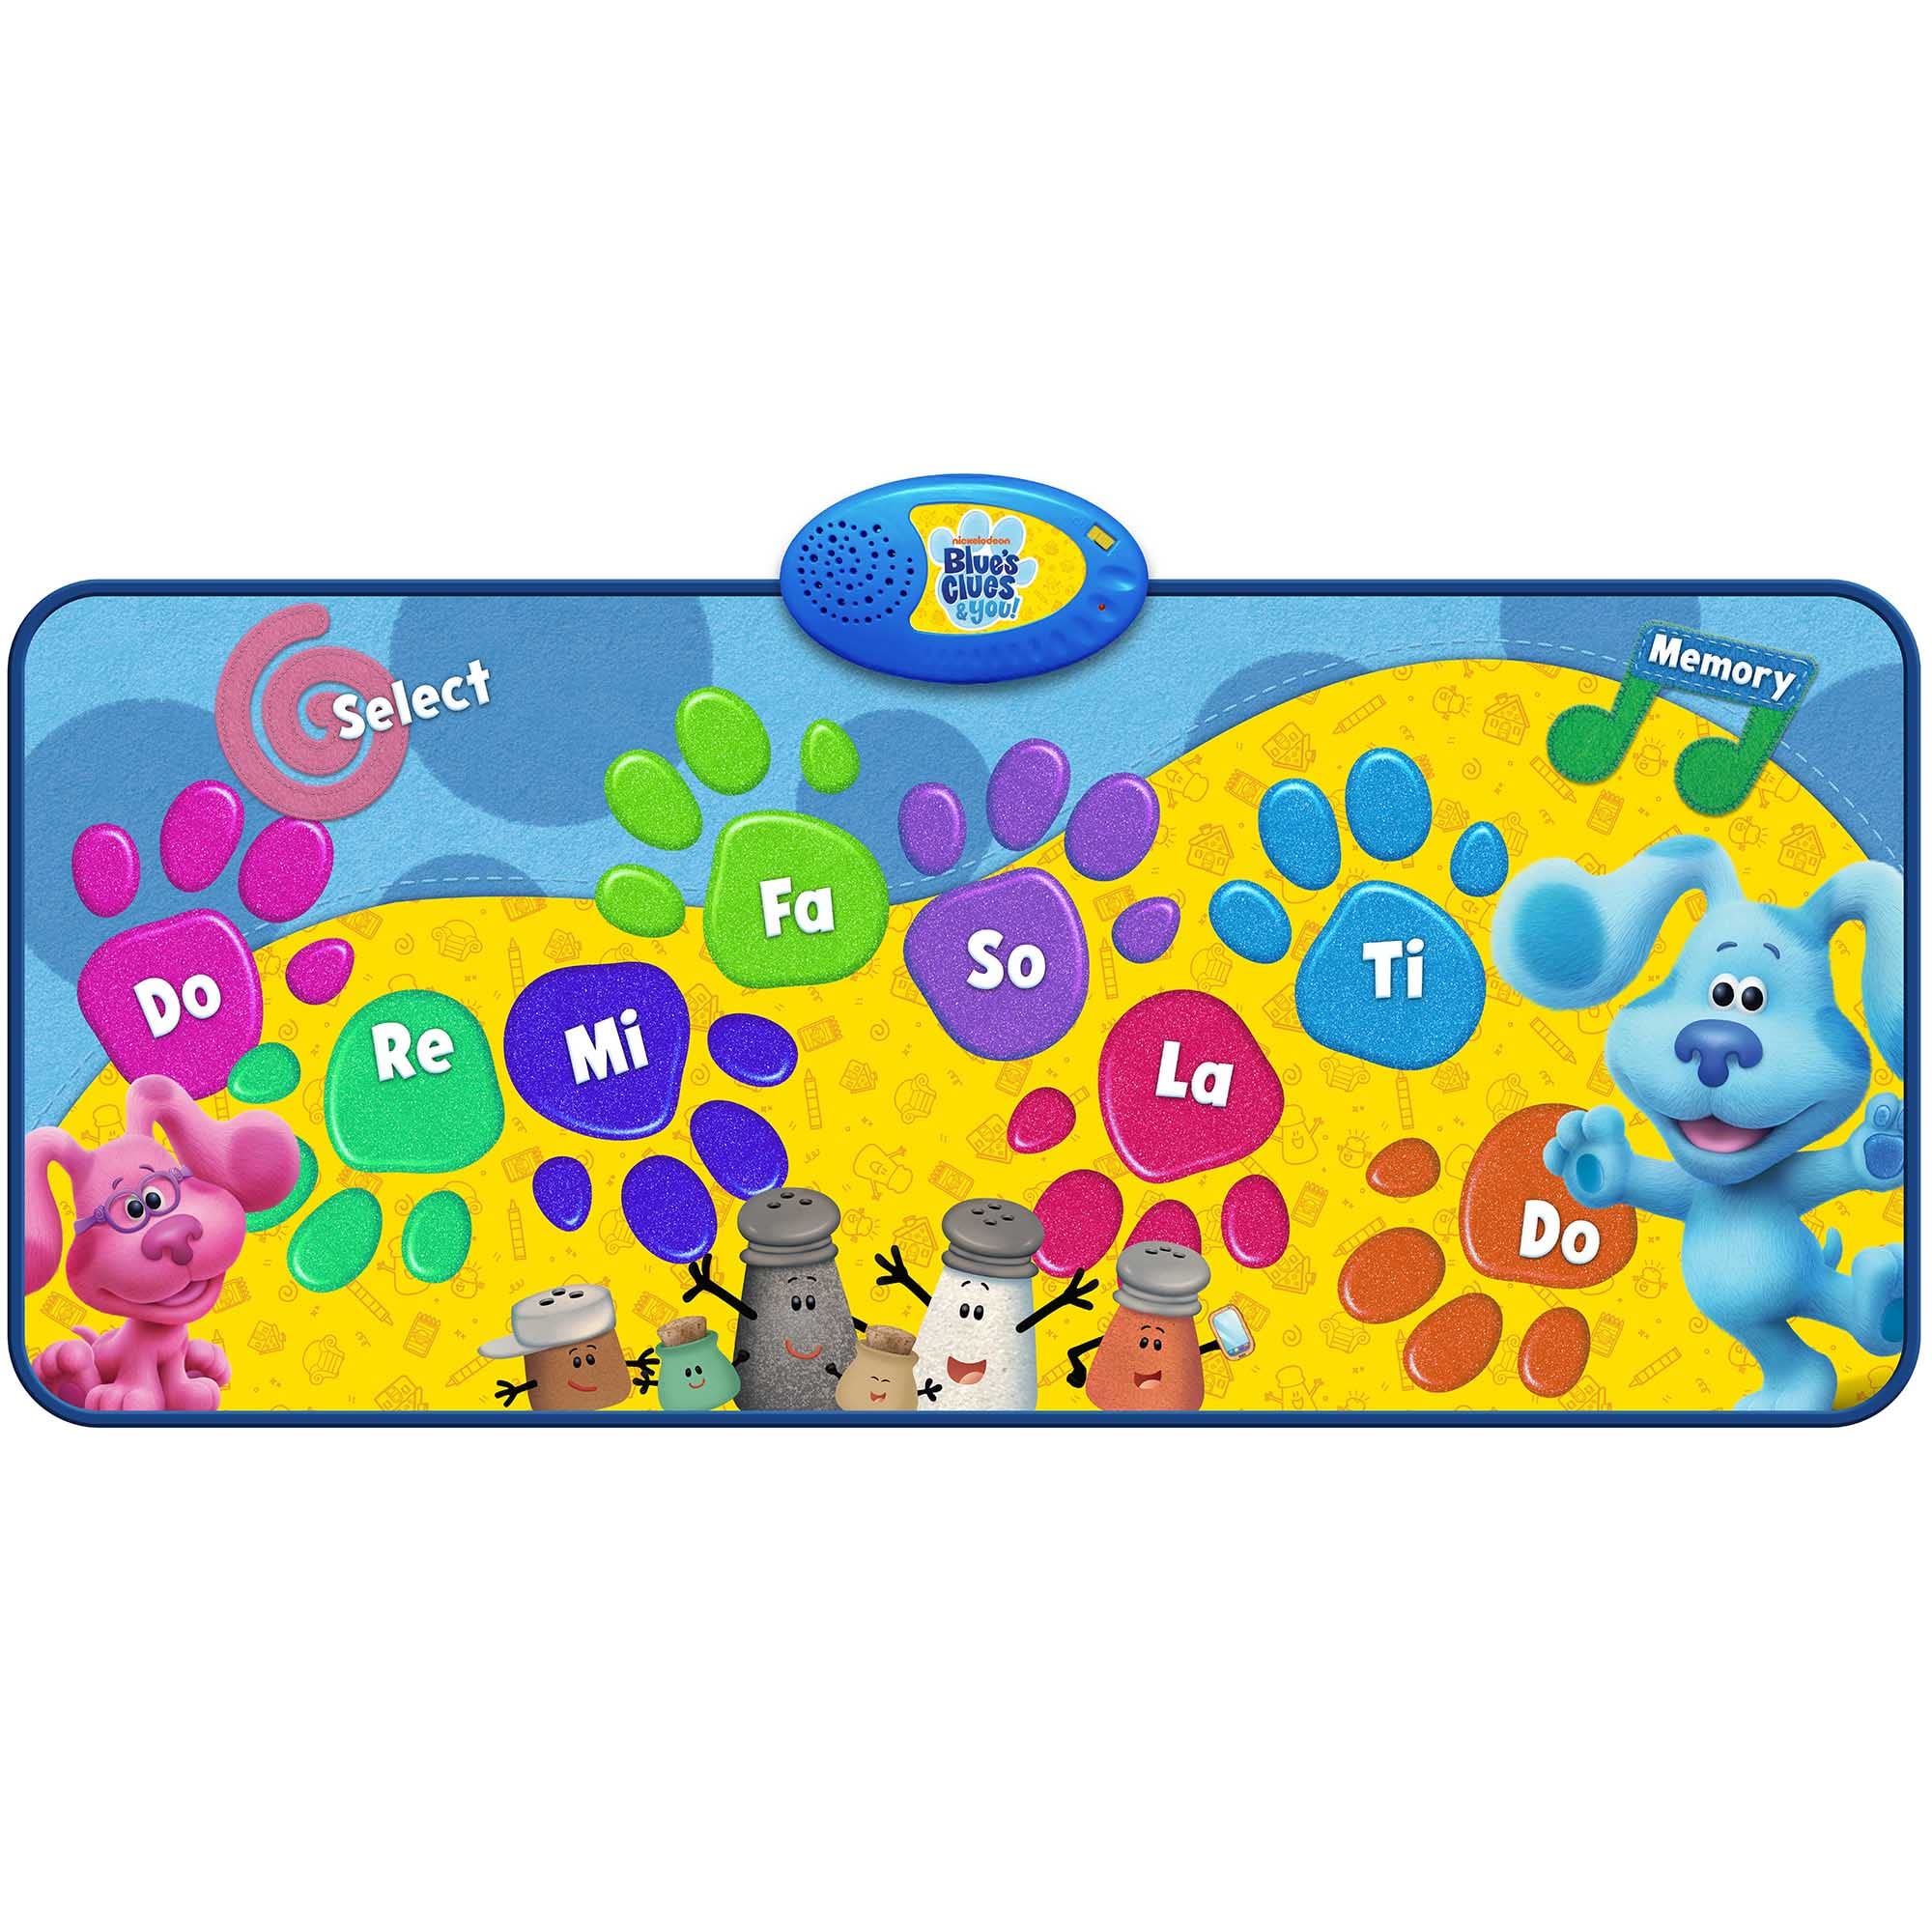 Blue's Clues and You: 8 Note Dance Playmat - Includes 4 Sounds & Memory Game Options, 31